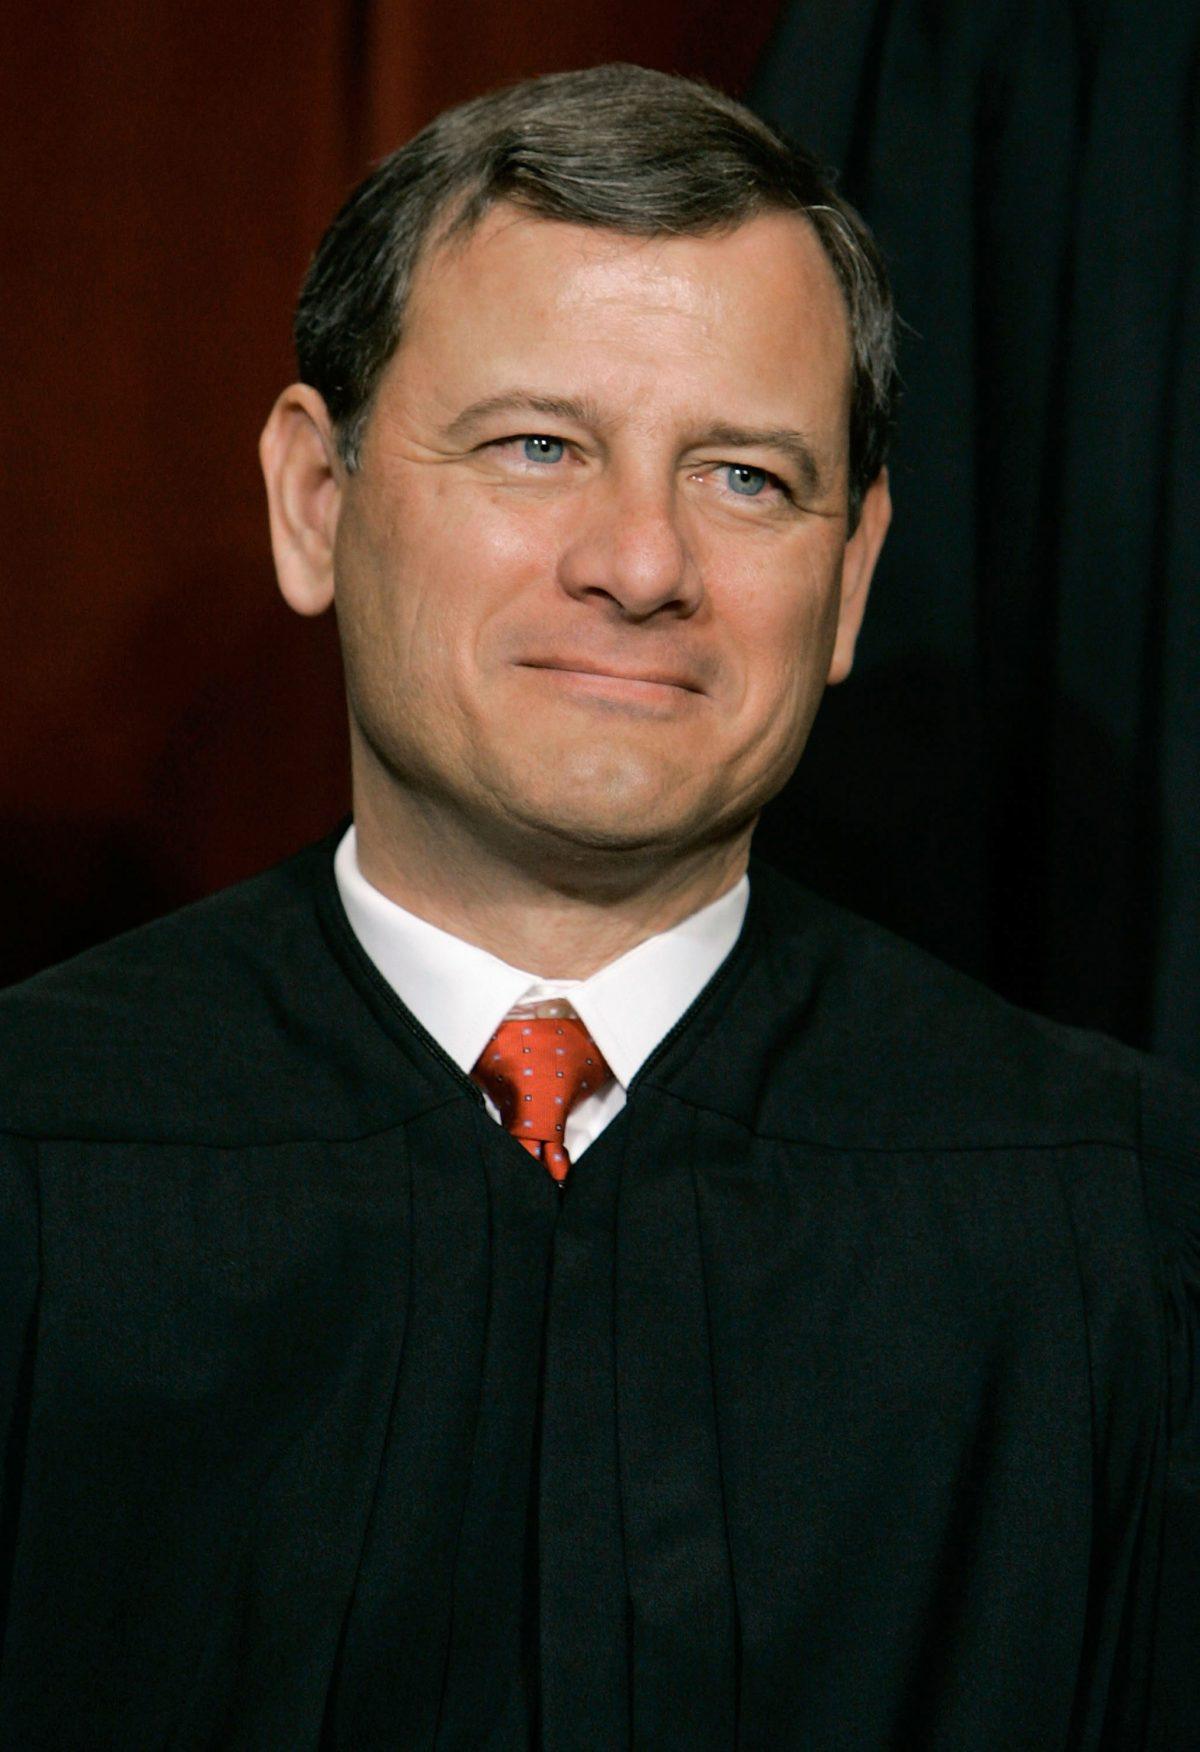 Chief Justice John G. Roberts in Washington on Oct. 31, 2005. (Mark Wilson/Getty Images)